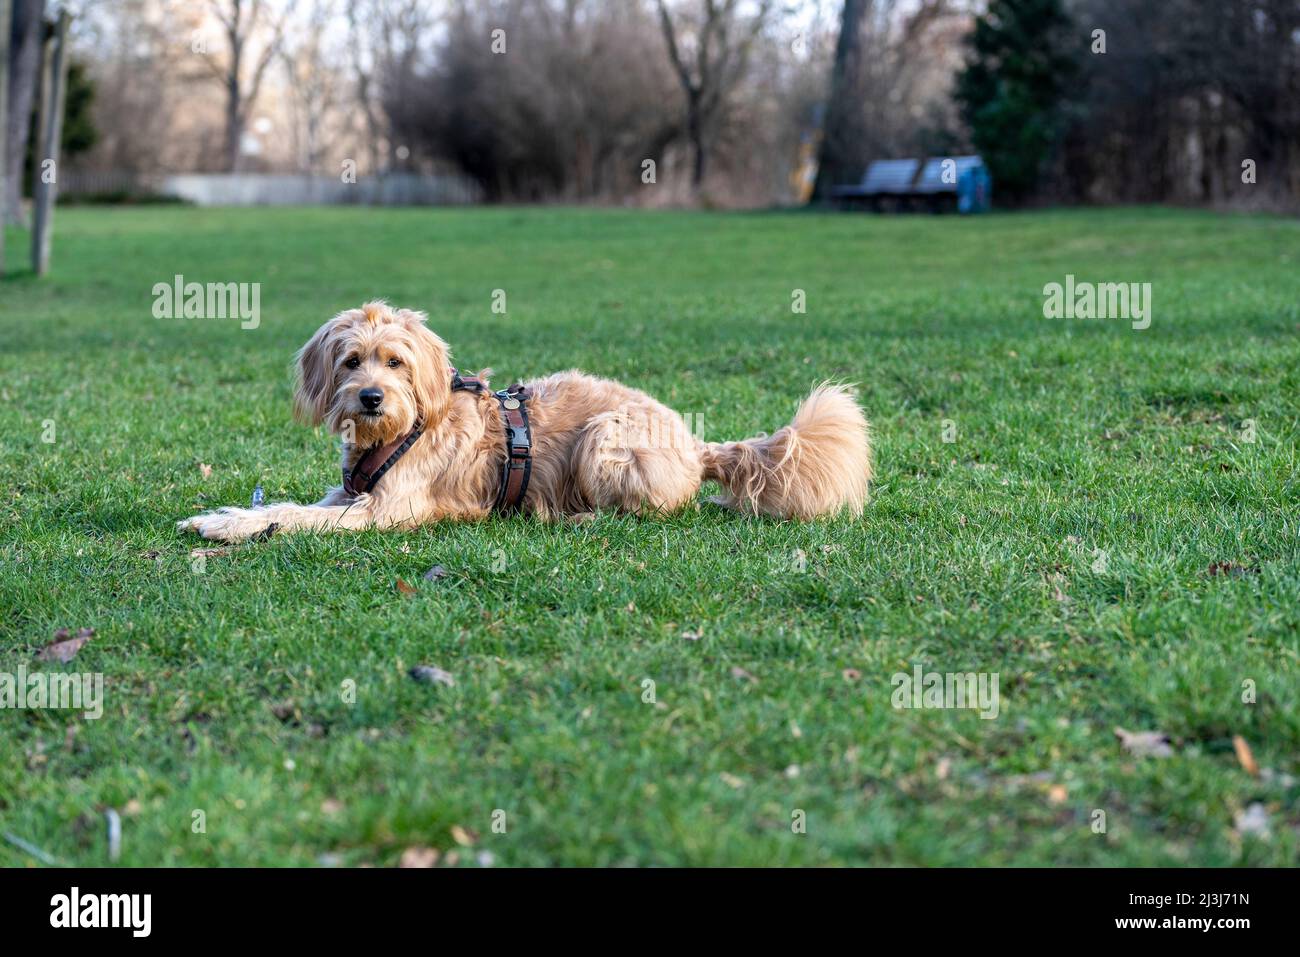 Cream colored dog, goldendoodle, lying on a meadow Stock Photo